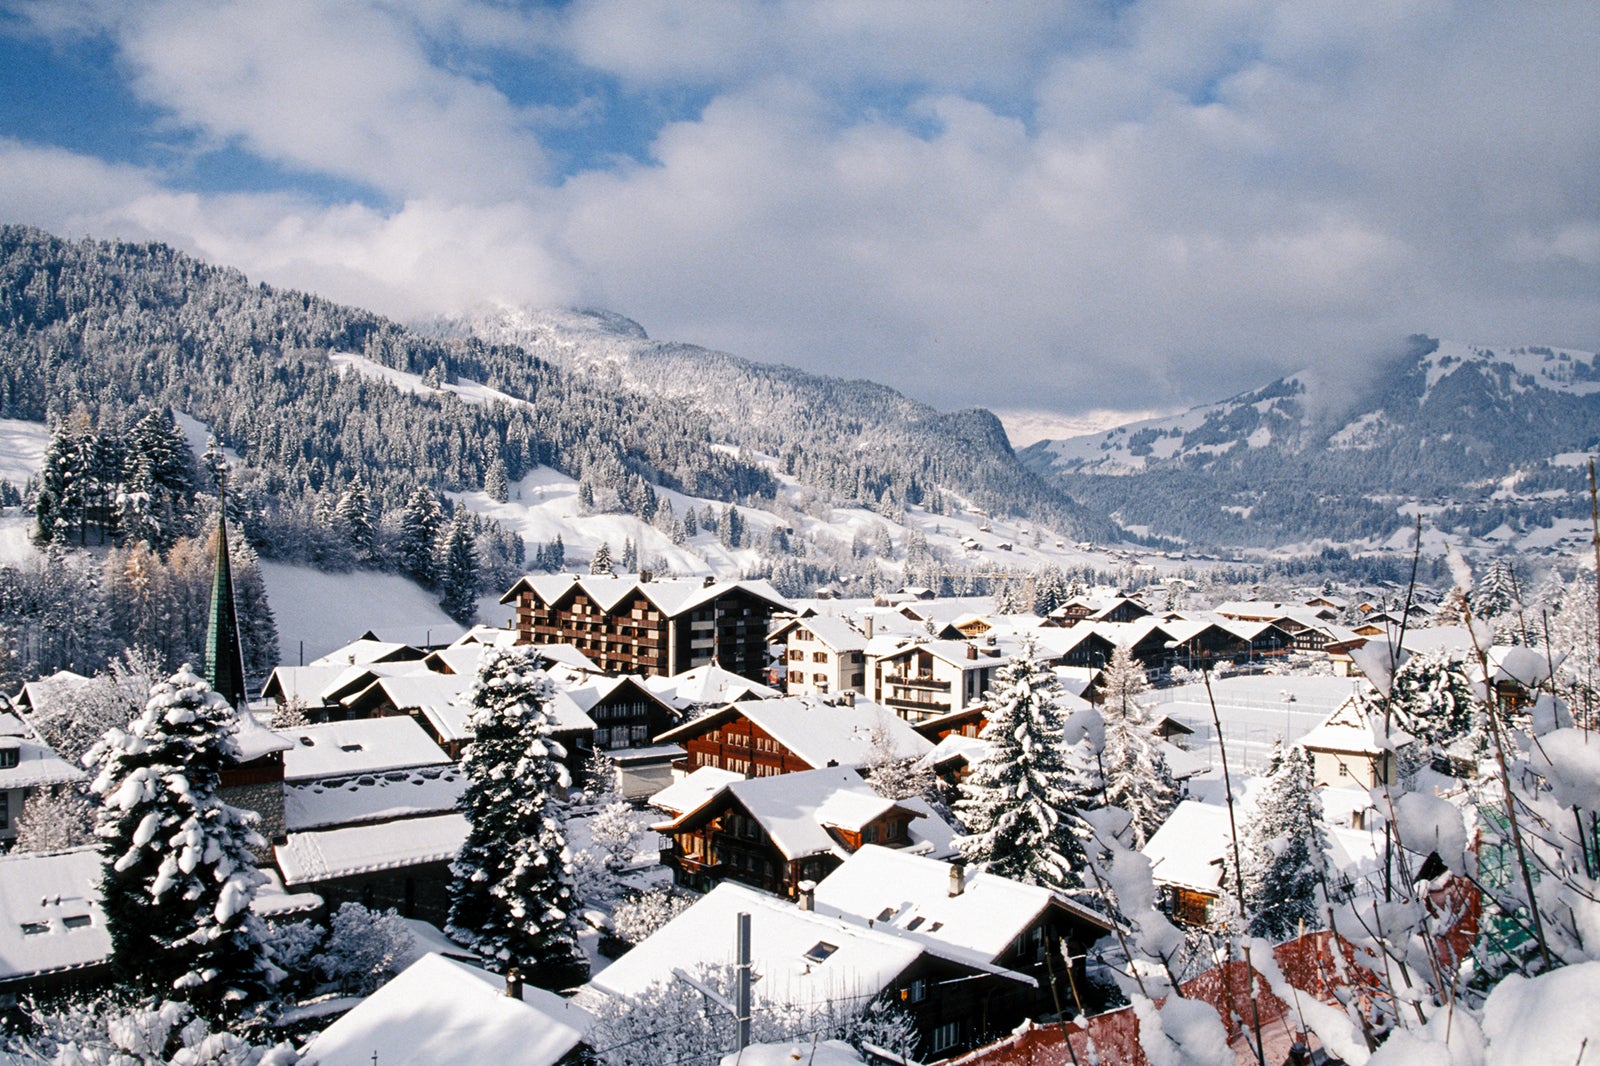 beautiful places to visit in winter europe